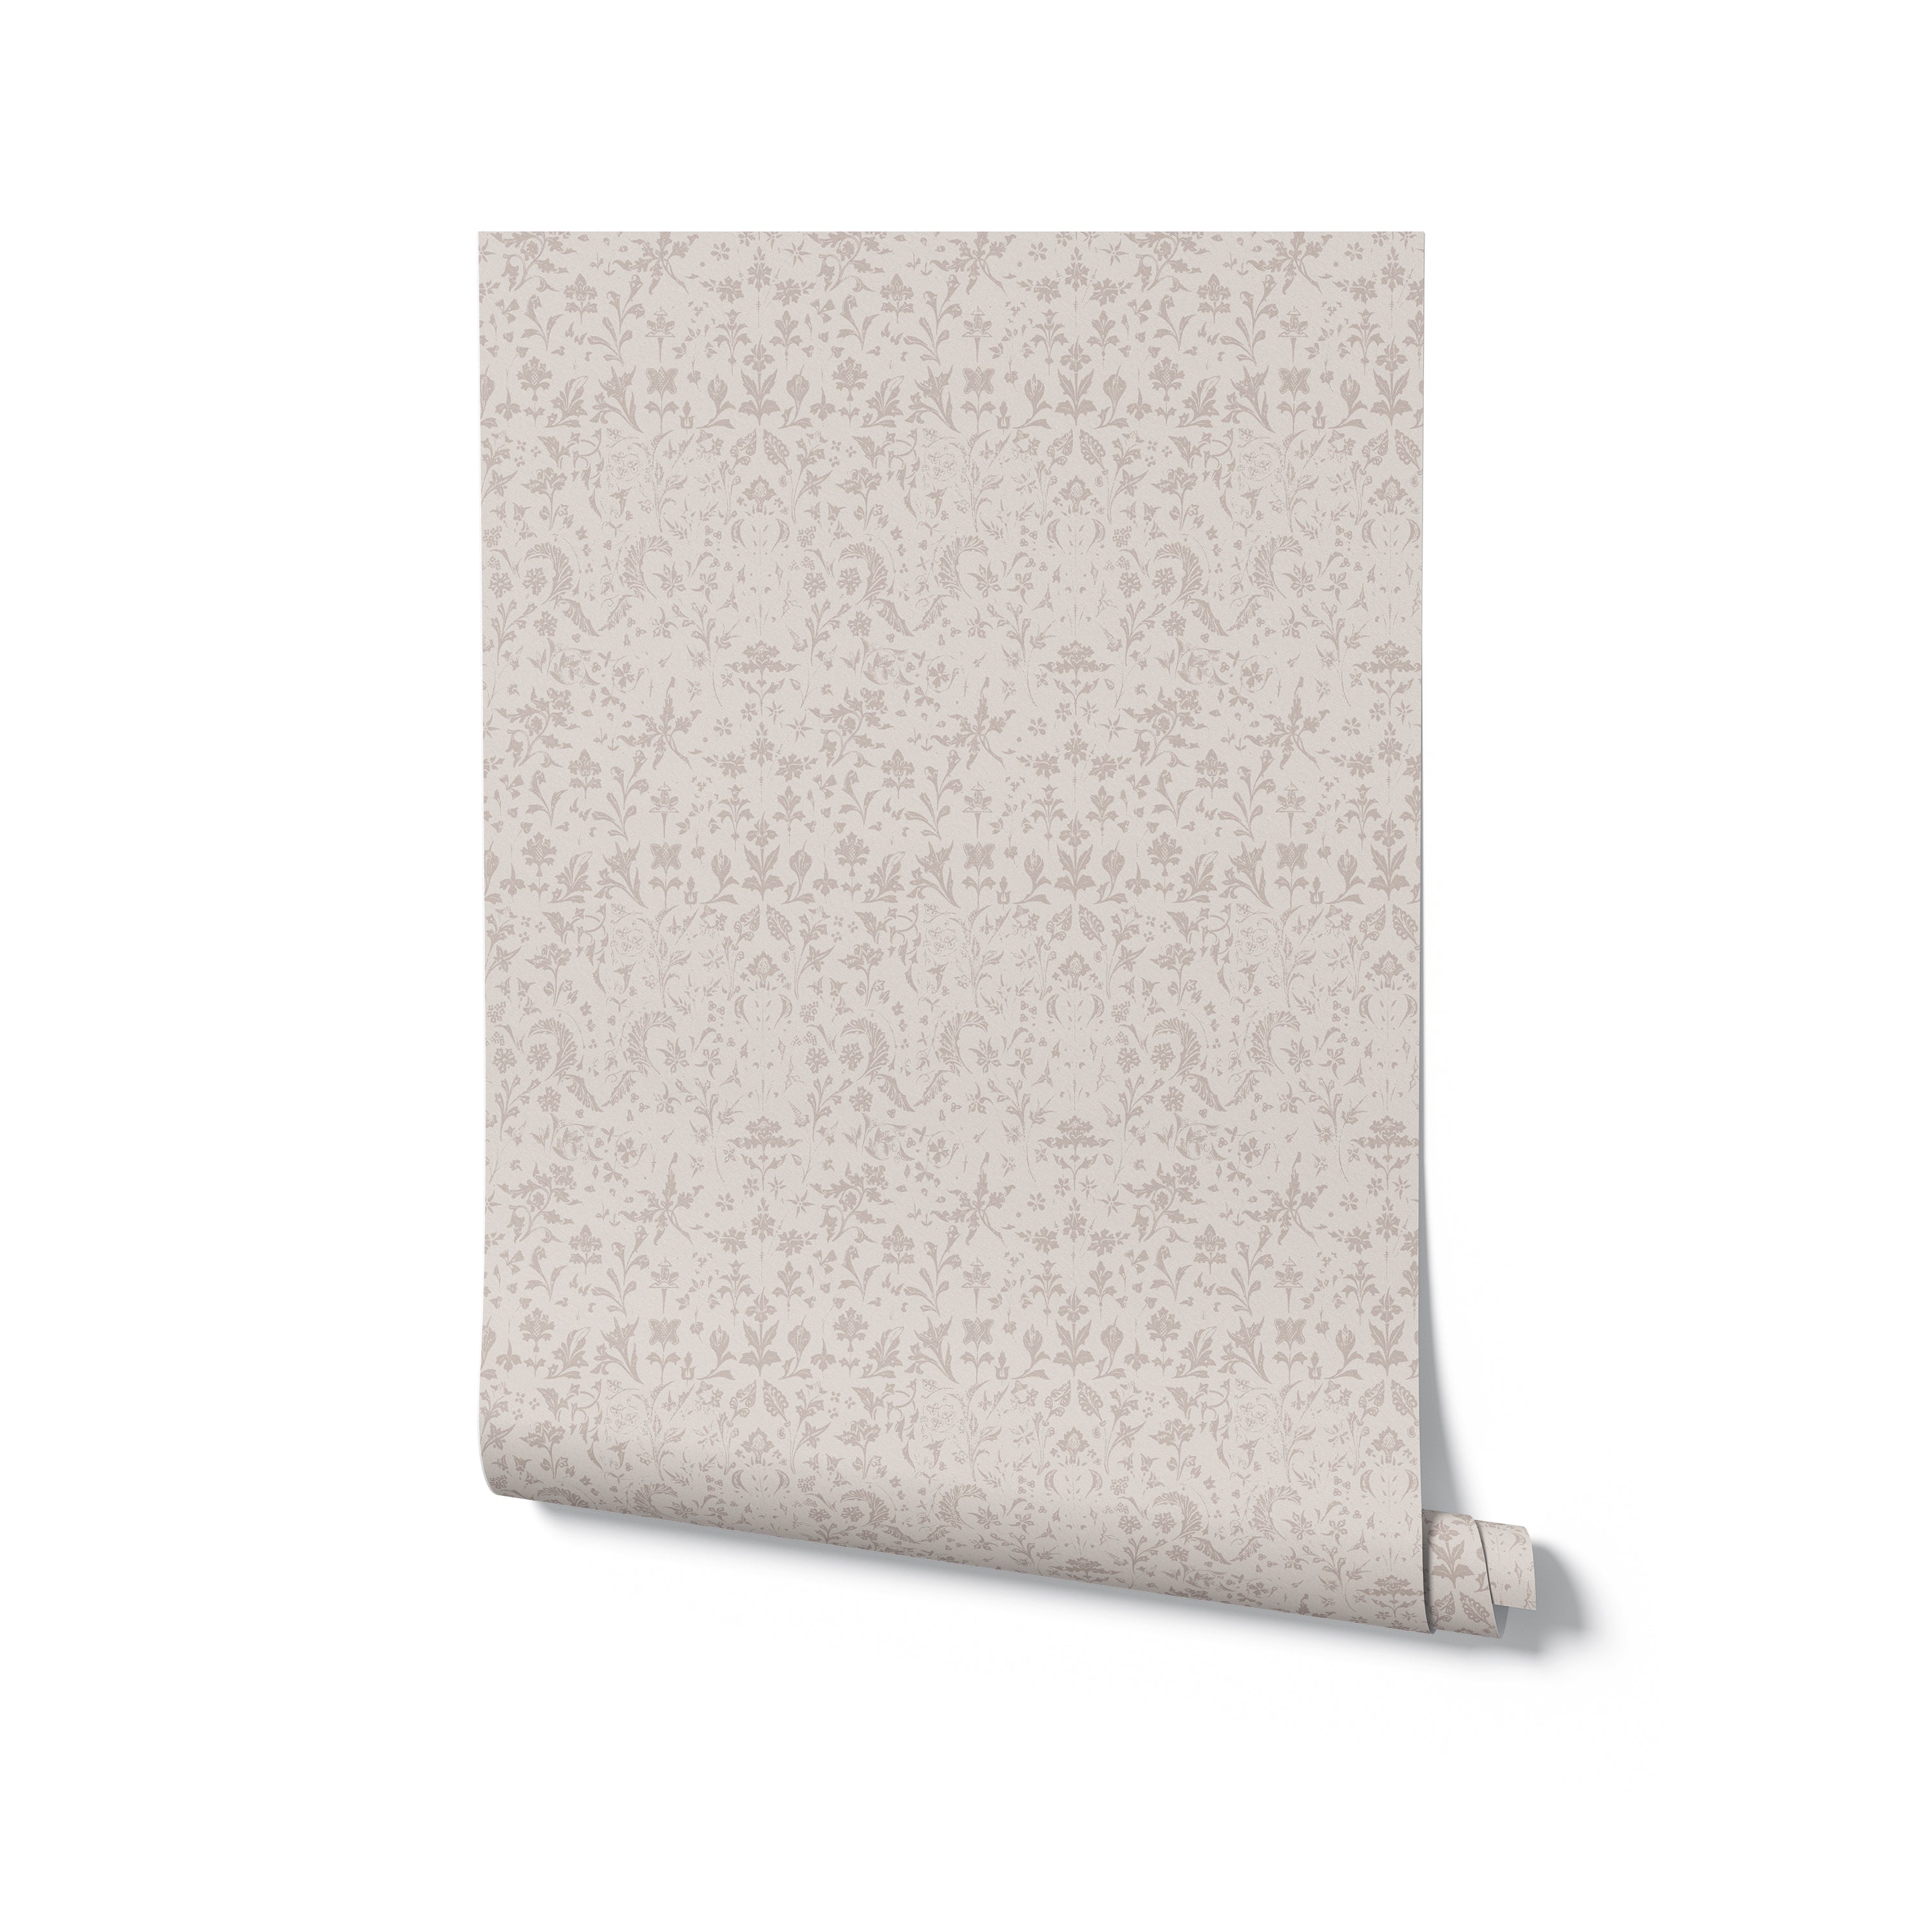 A roll of Frontenac Wallpaper displaying its intricate light taupe pattern. The wallpaper is neatly rolled, highlighting the detailed and elegant design, ideal for enhancing the aesthetic appeal of any room.